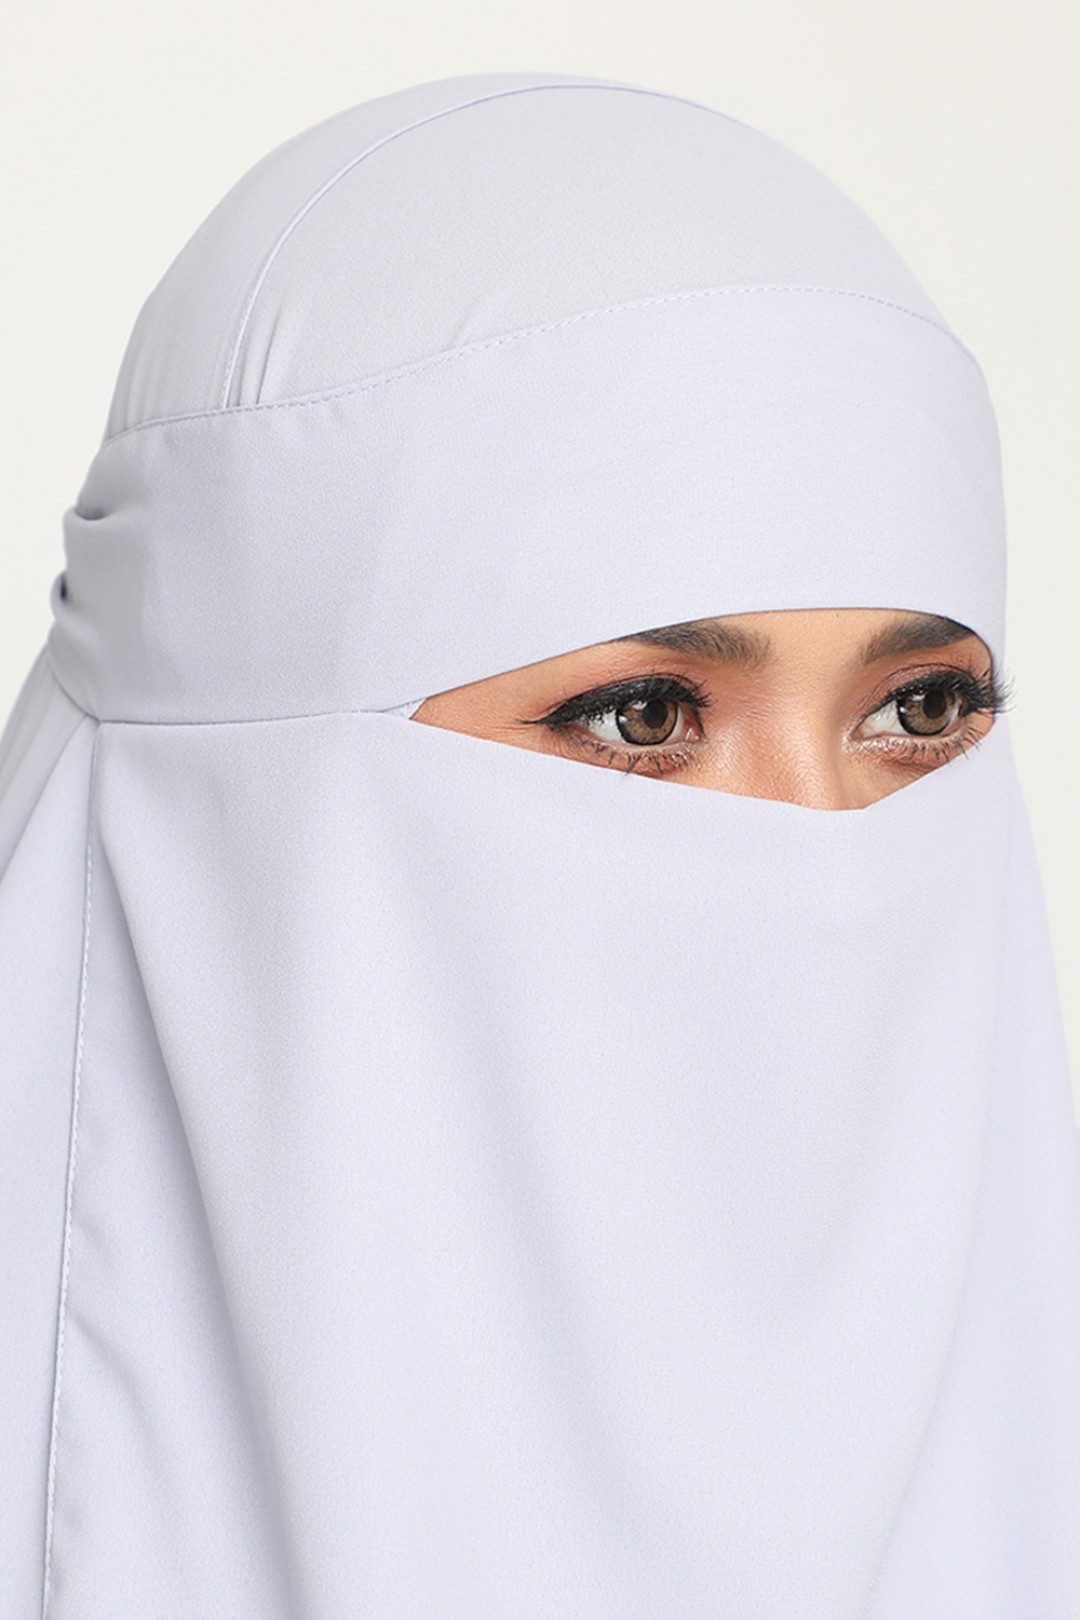 As-Is Niqab Pink Puce